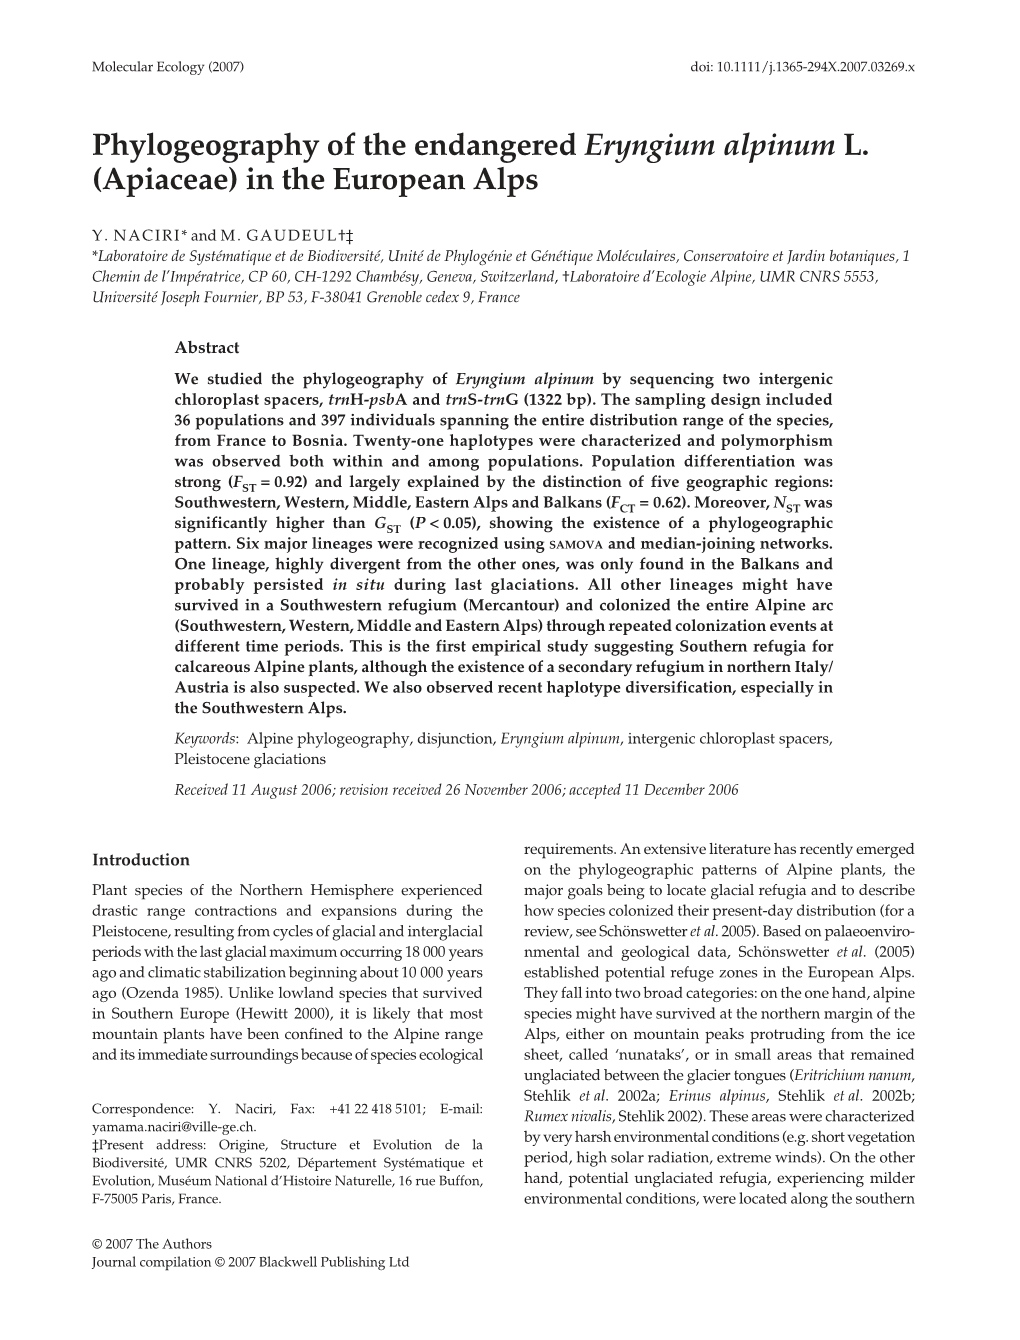 Phylogeography of the Endangered Eryngium Alpinum L. (Apiaceae) In